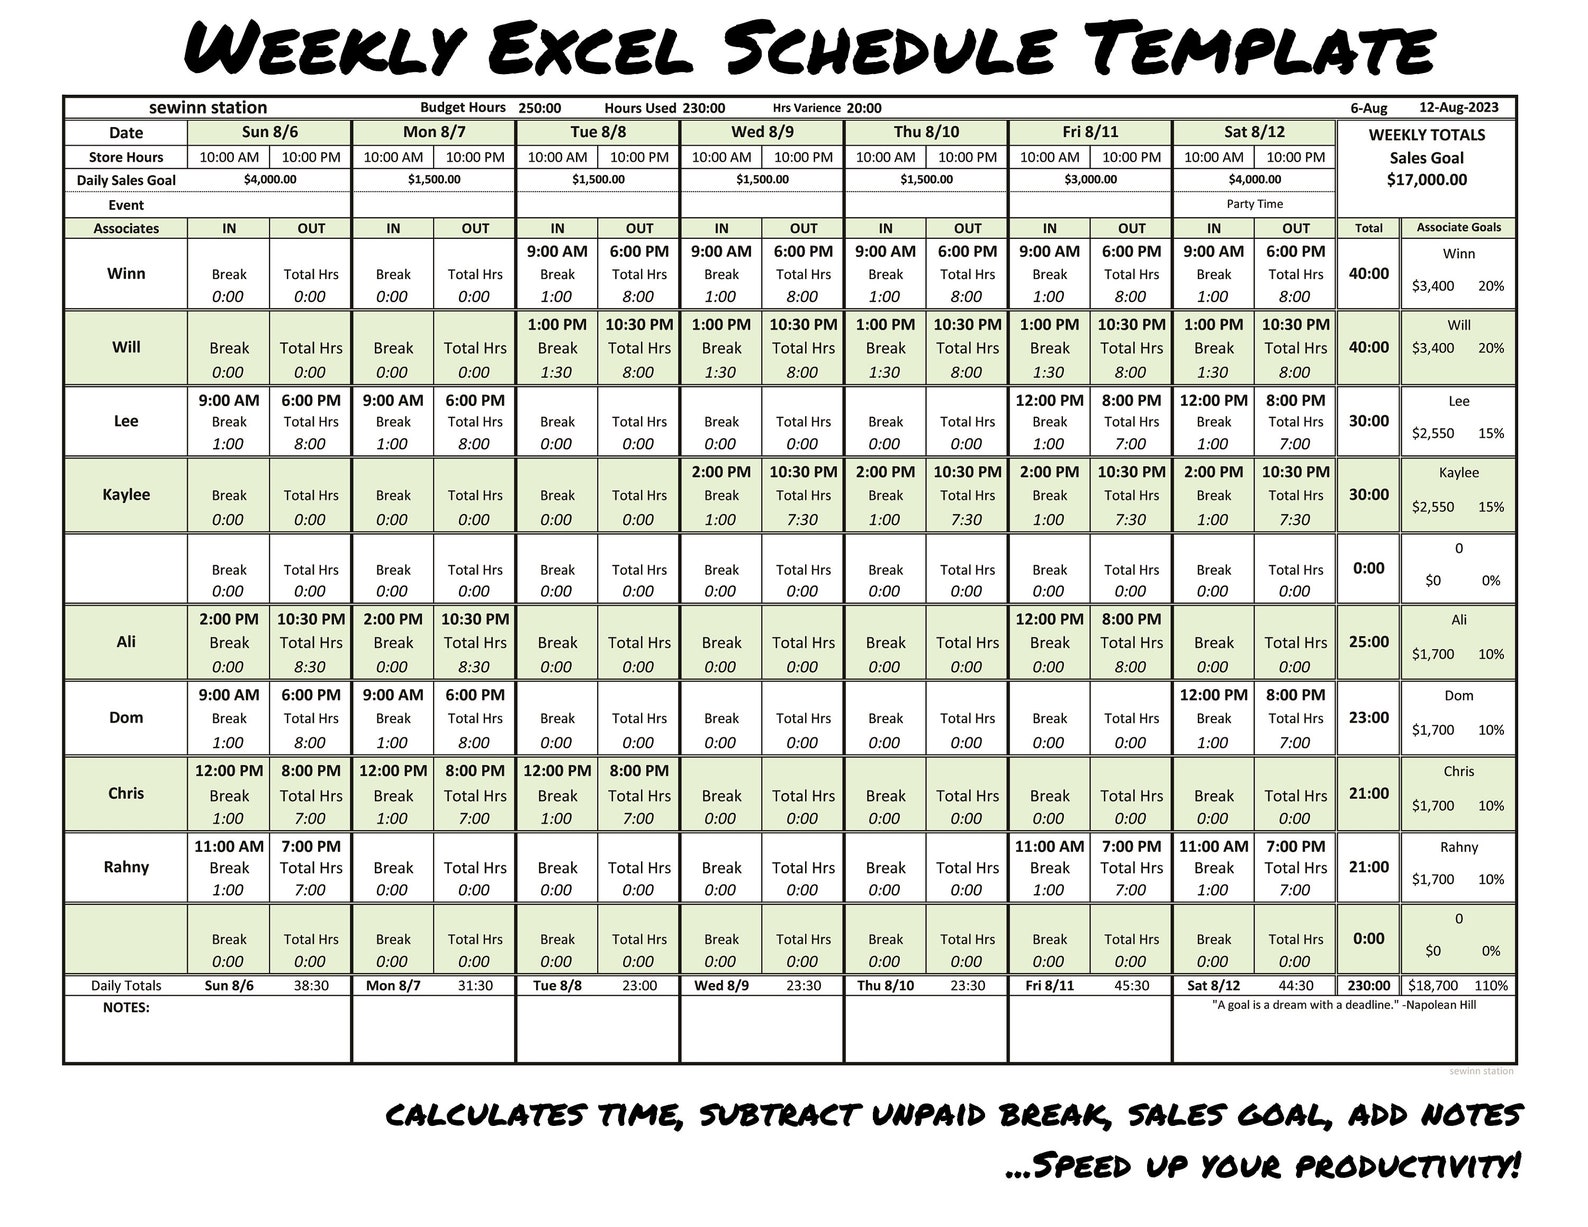 Excel Schedule Template That Calculates Hours